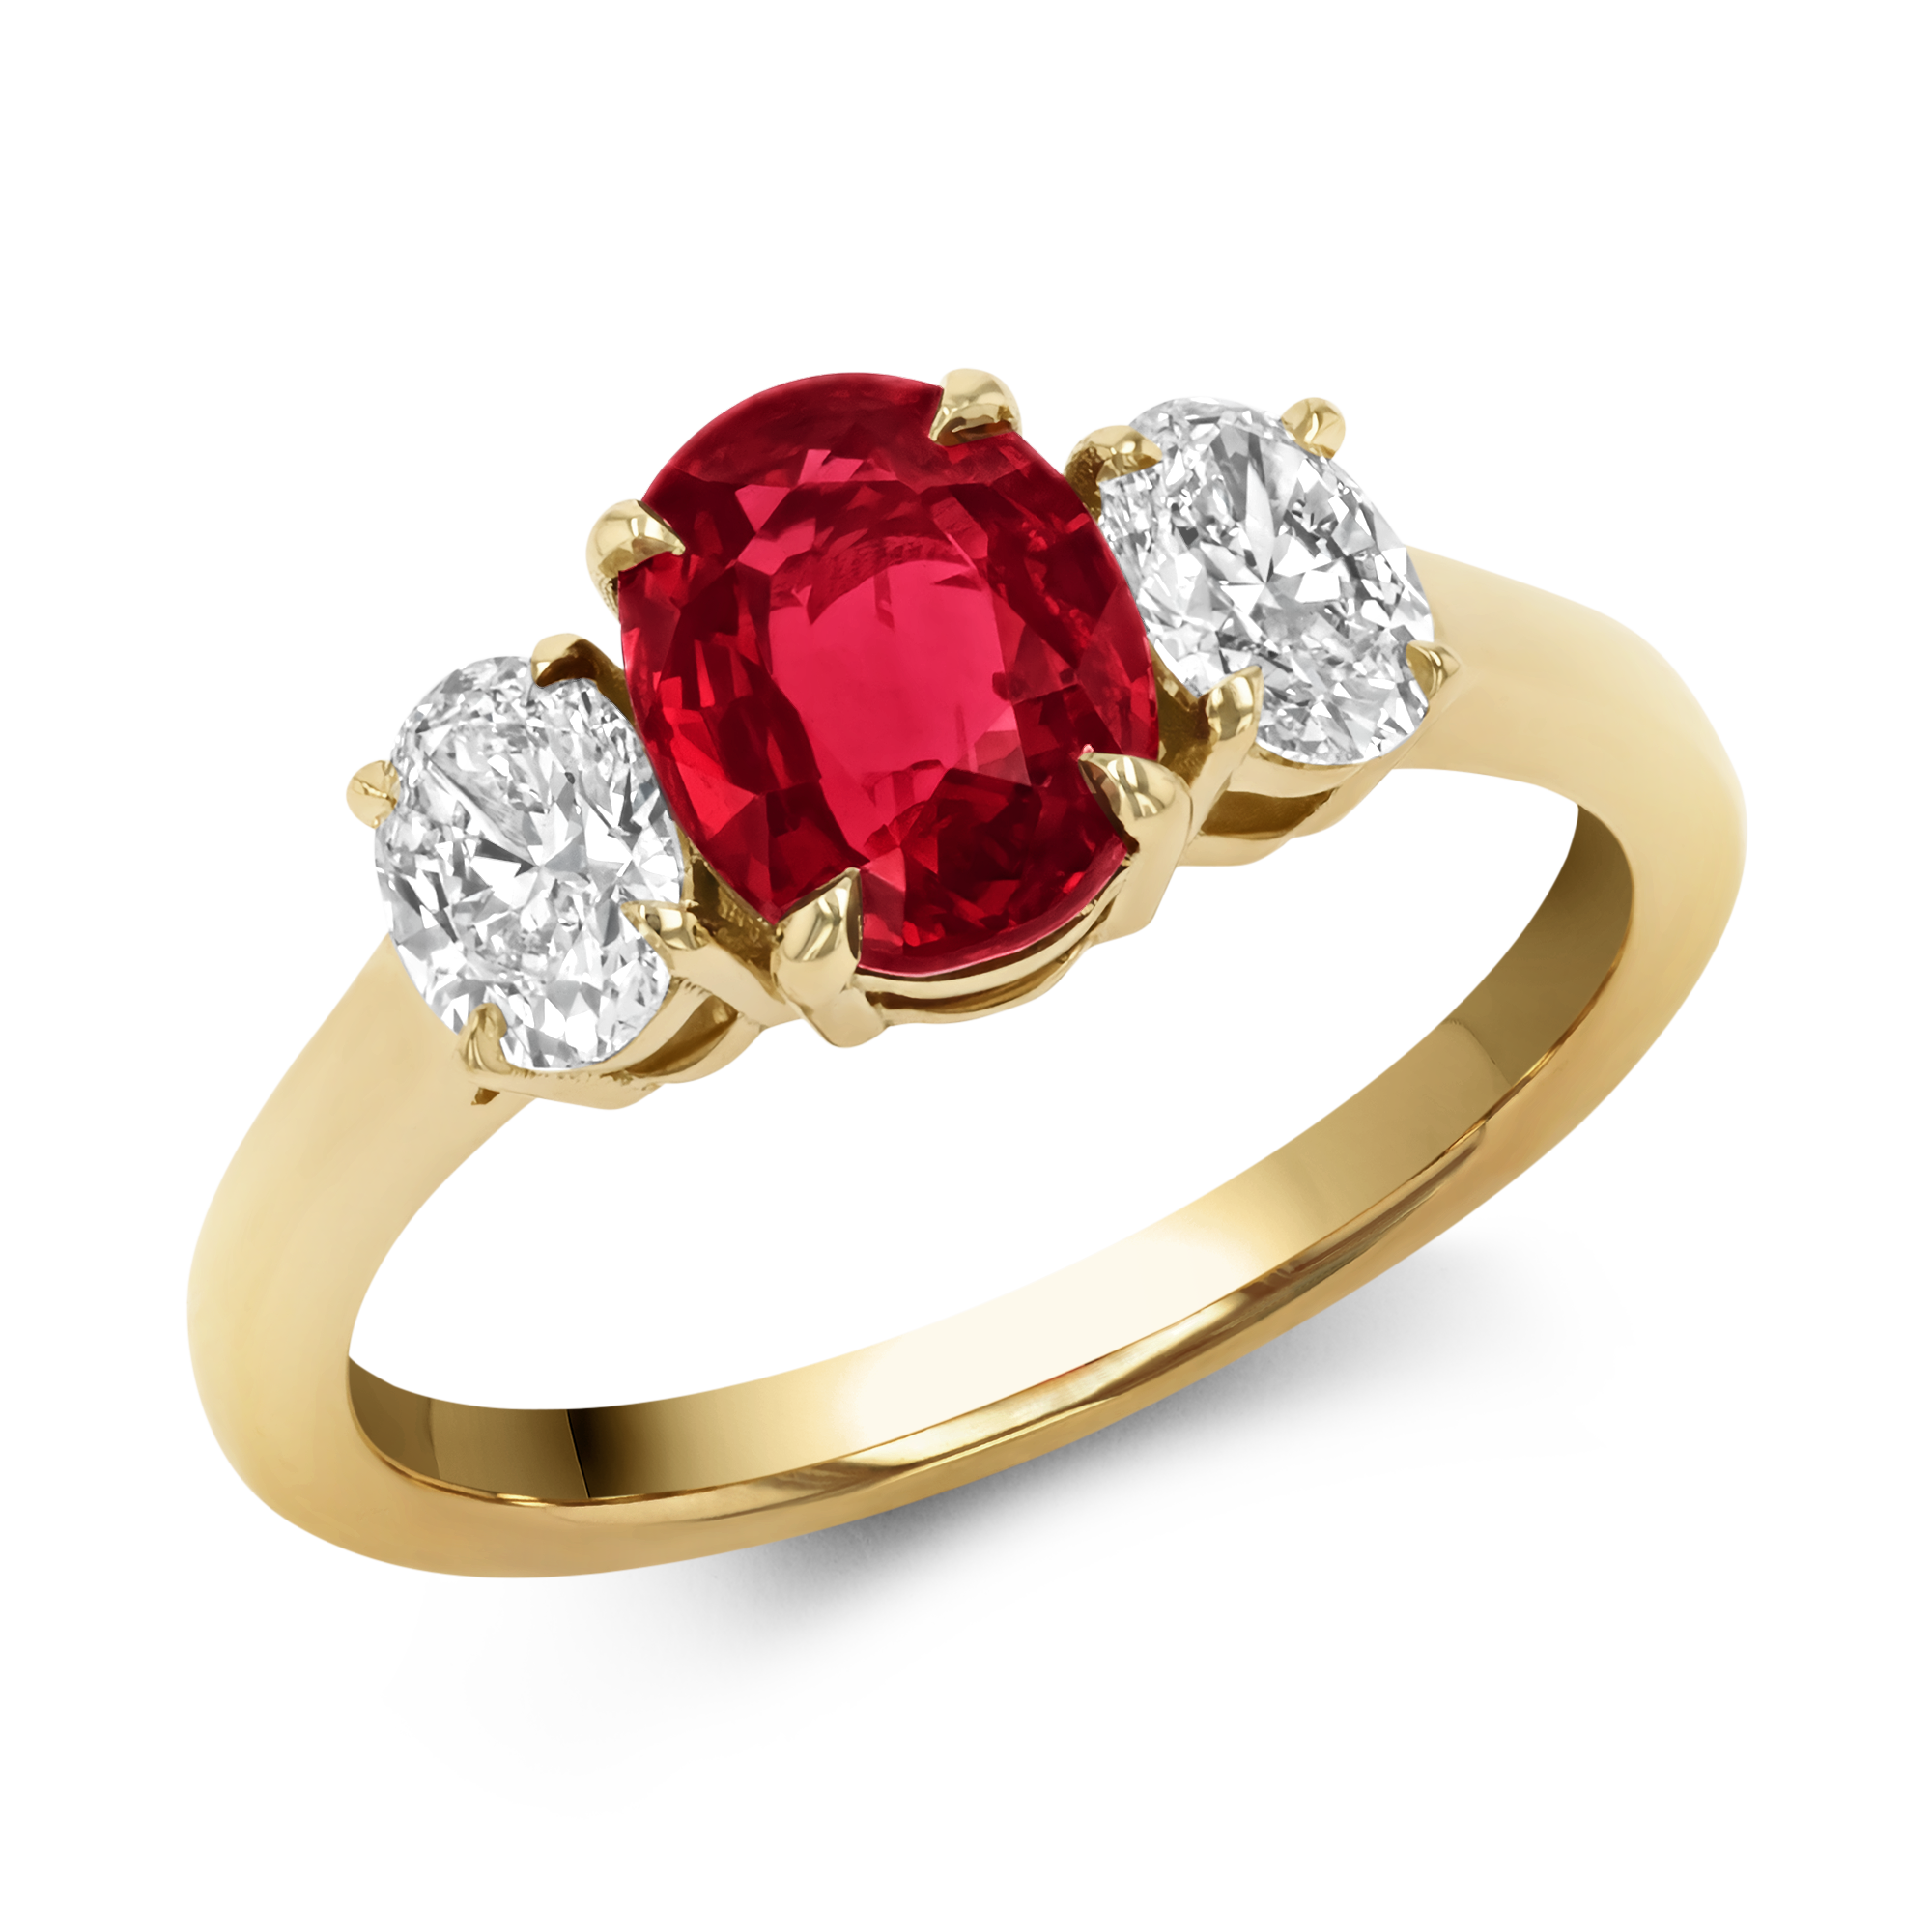 Mozambique 1.53ct Ruby and Diamond Three Stone Ring Oval Cut, Claw Set_1